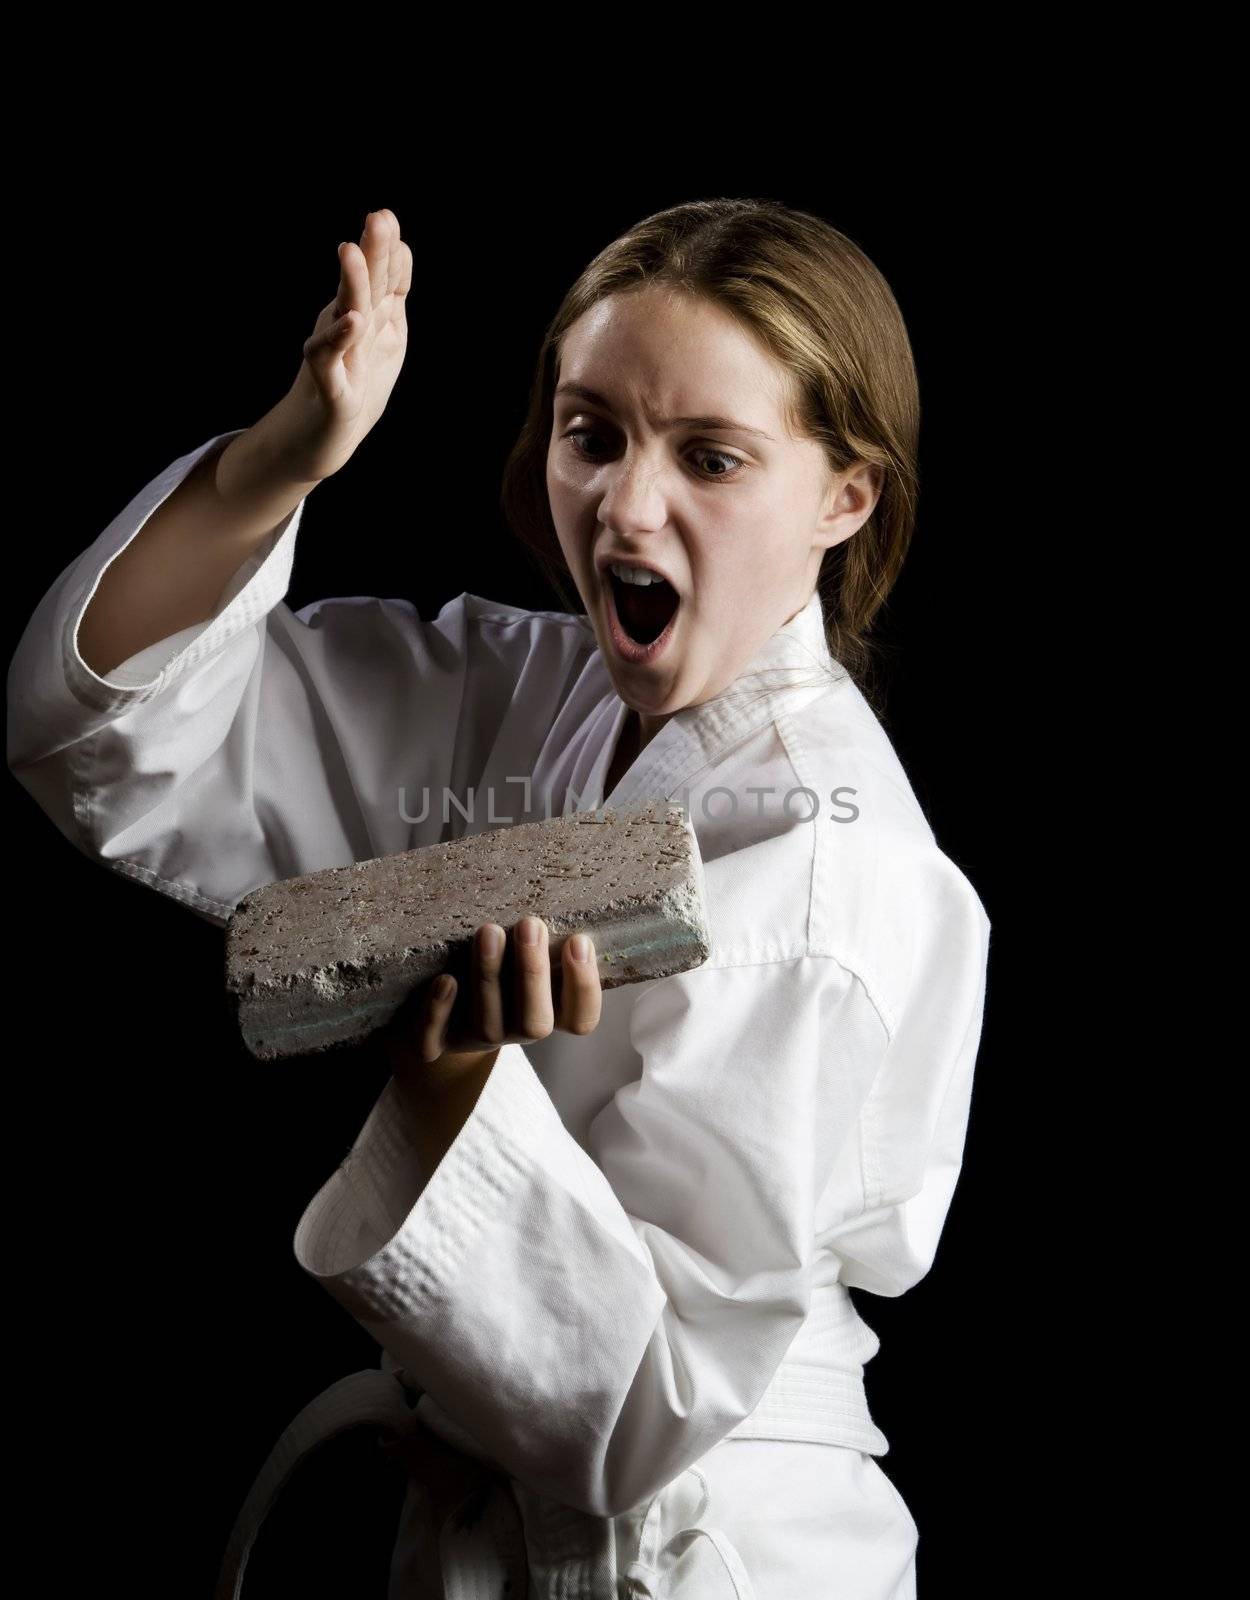 Young girl karate chopping a brick on black background